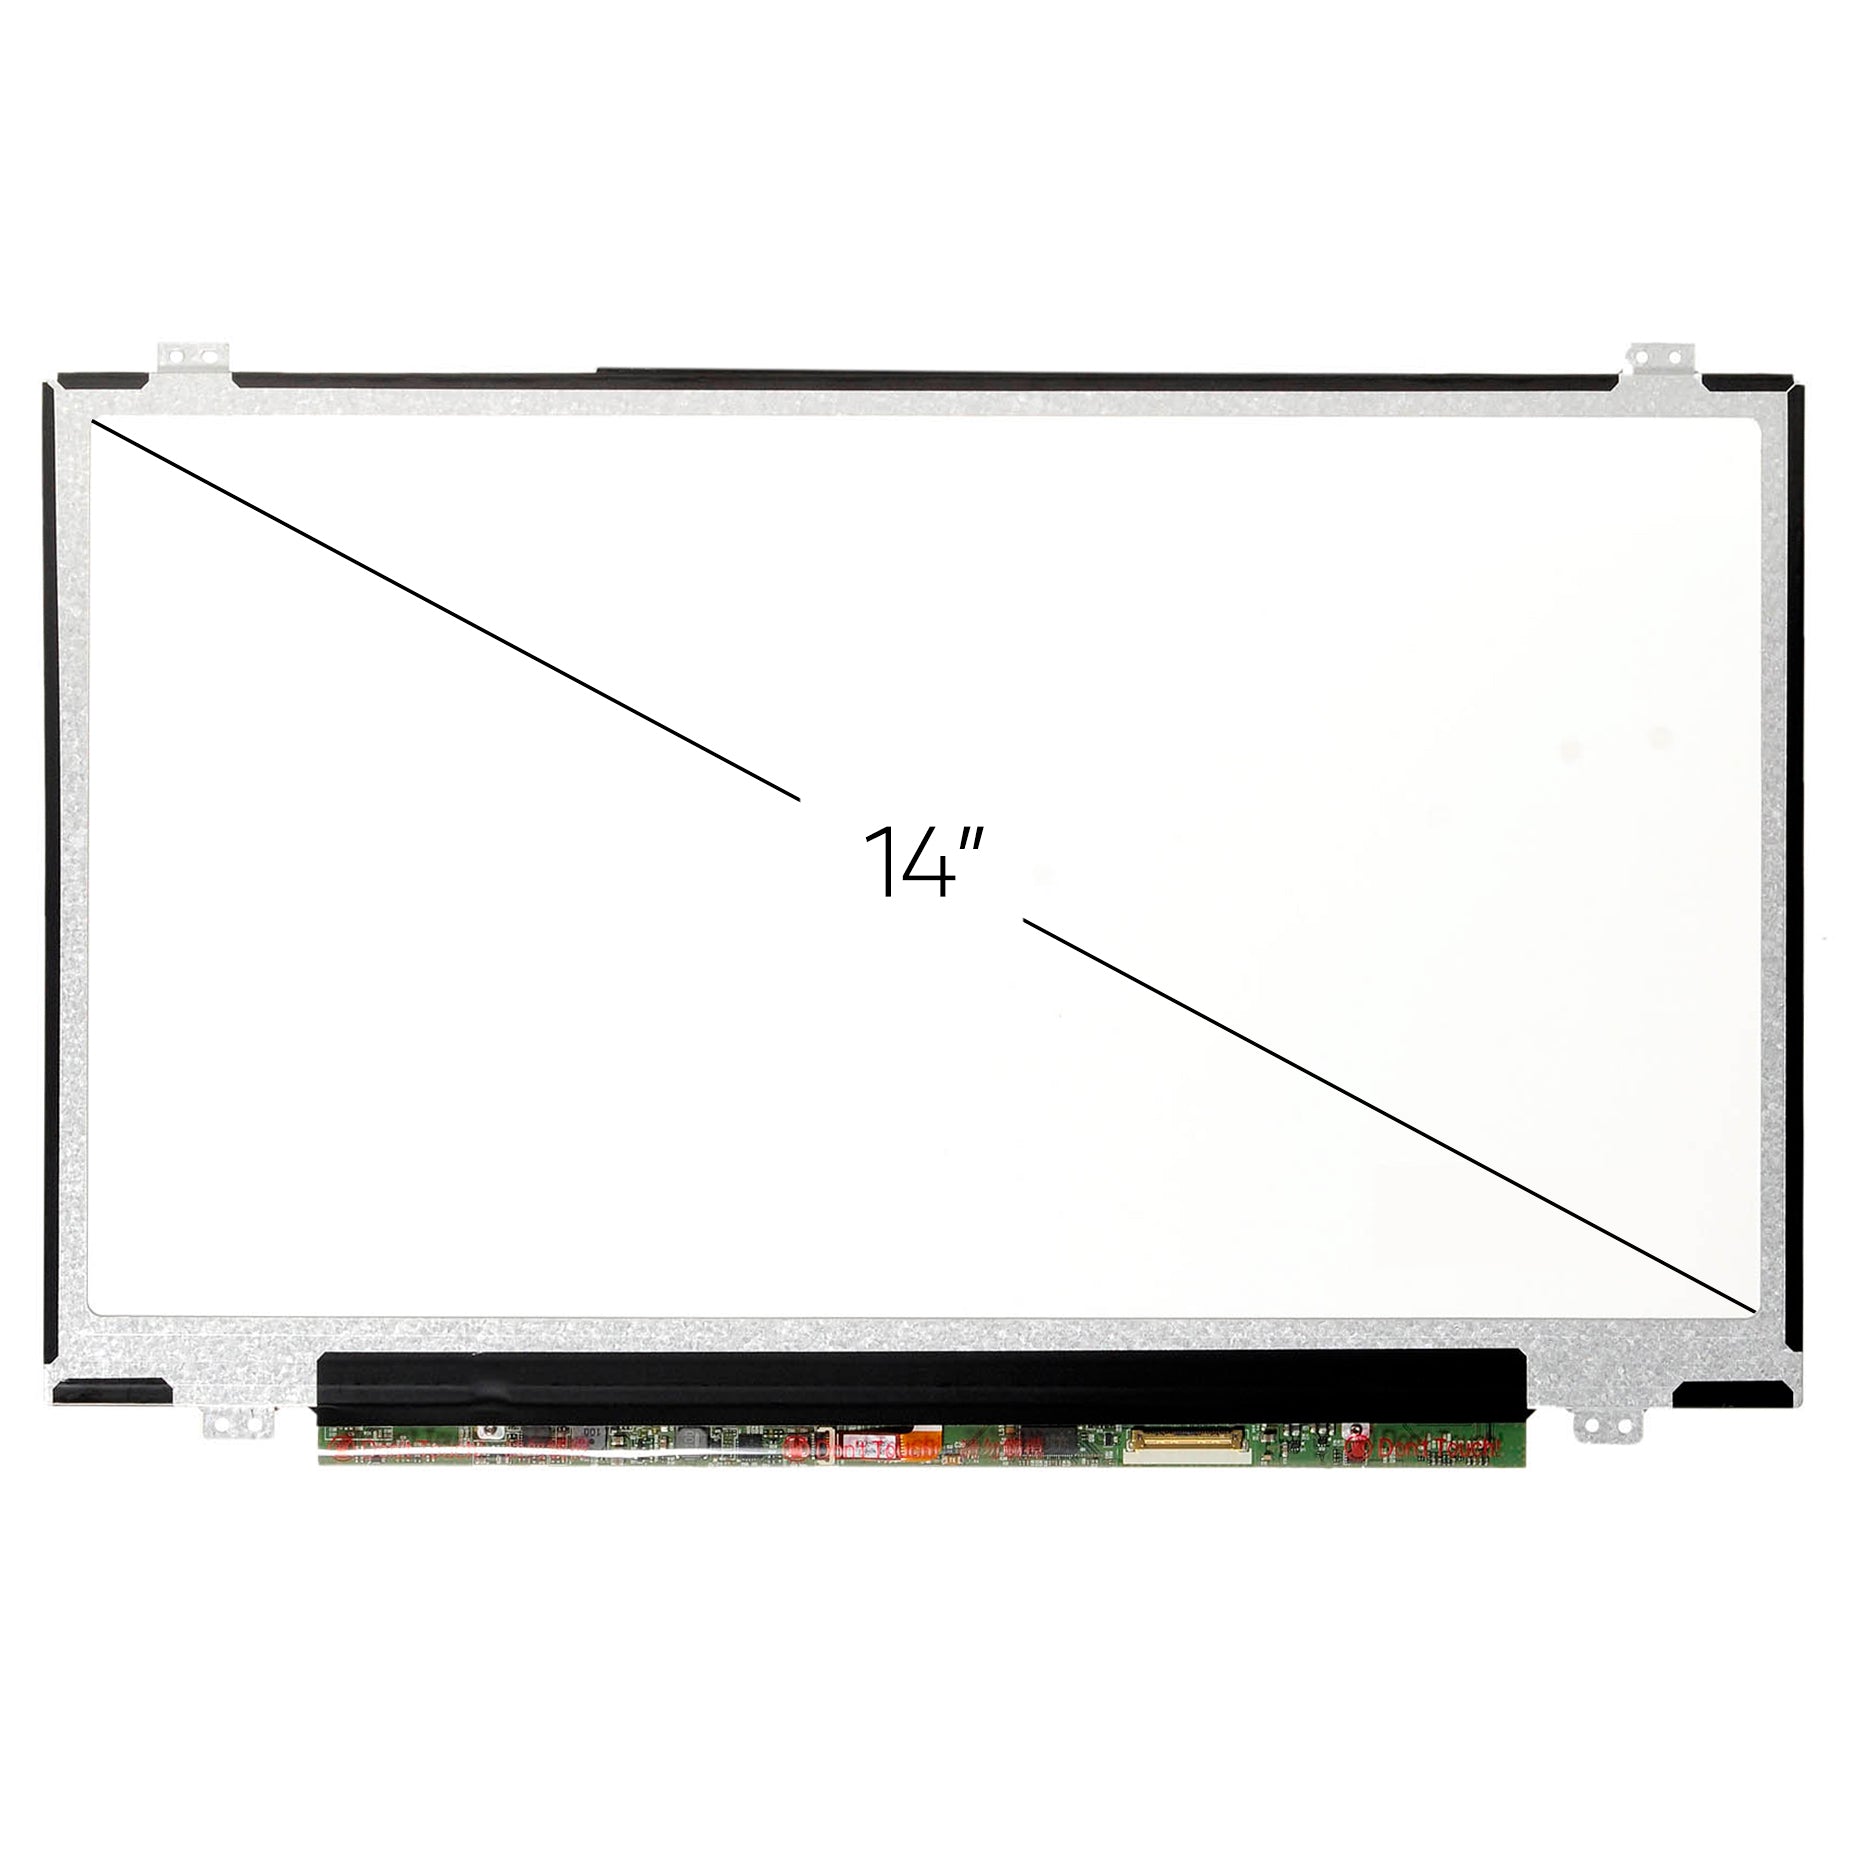 Screen Replacement for Dell P/N RN91N DP/N 0RN91N FHD 1920x1080 IPS Matte LCD LED Display